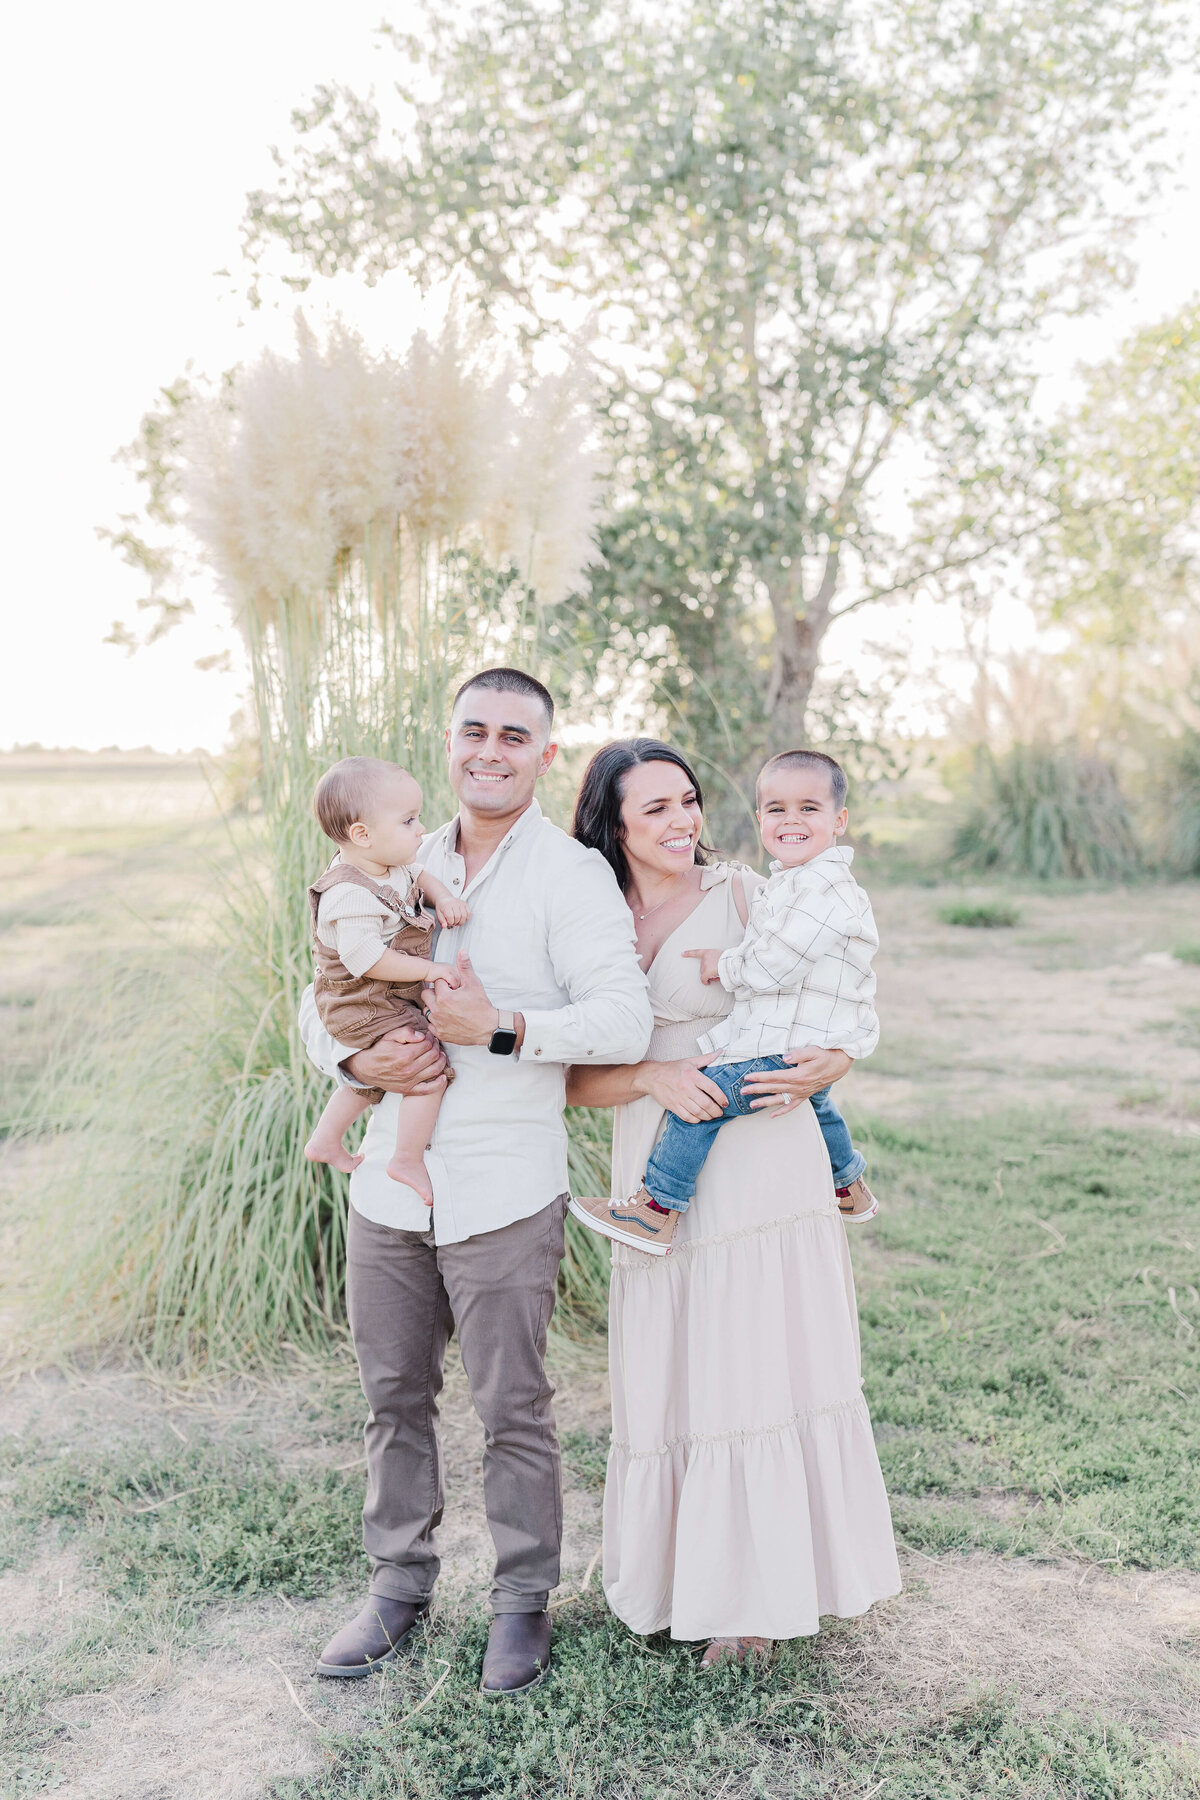 family laughing in the park at sunset by Caroline Bendel, Sacramento Family Photographer